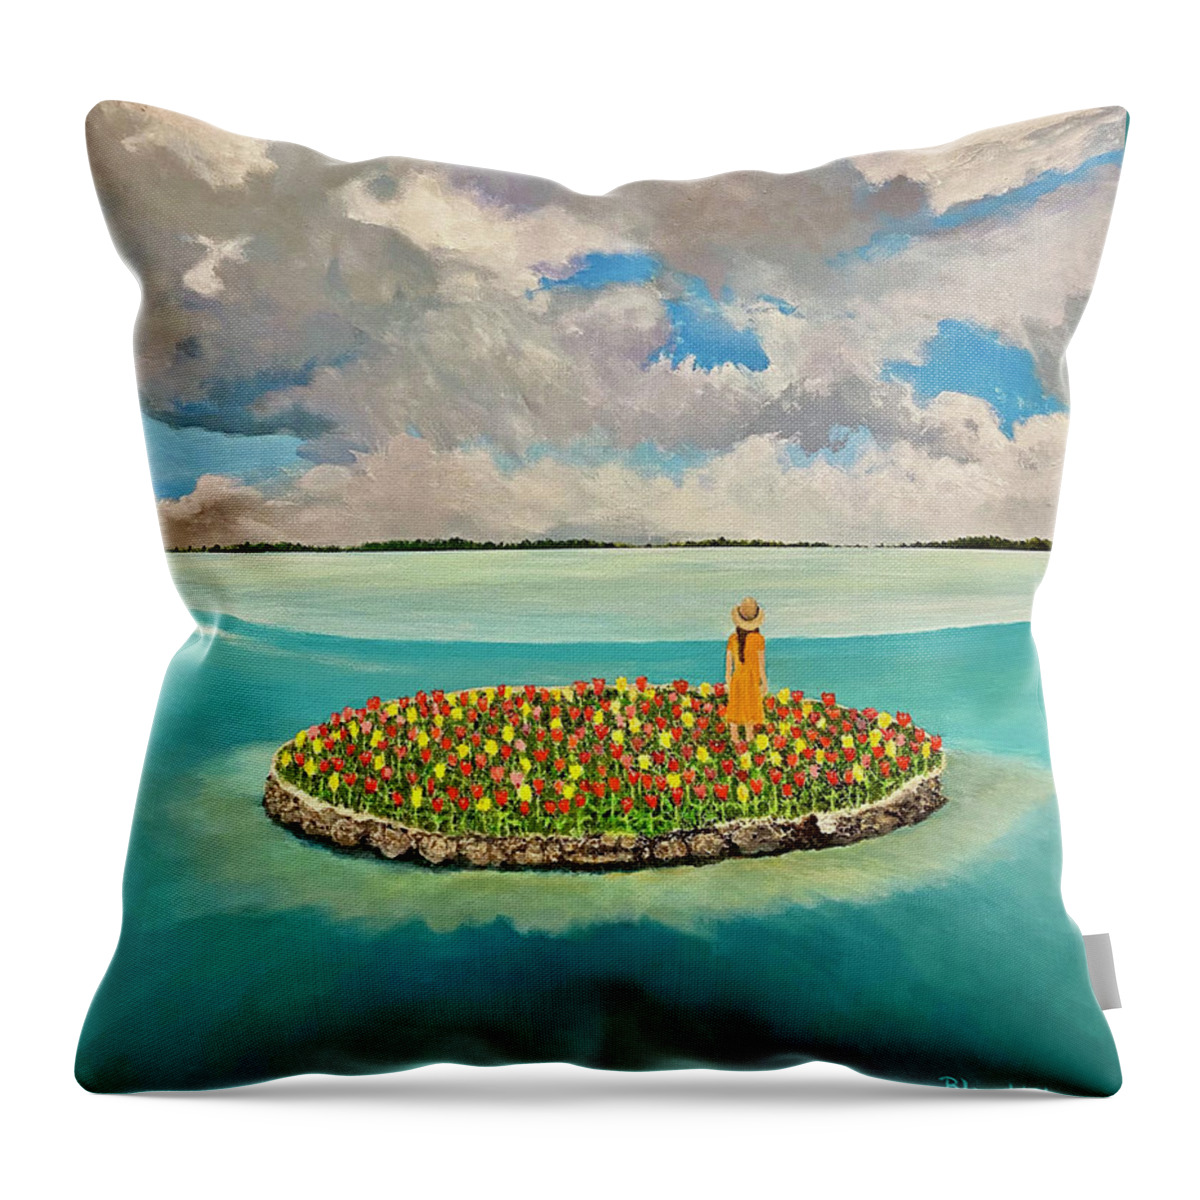 Tulip Island Throw Pillow featuring the painting Tulip Island by Thomas Blood